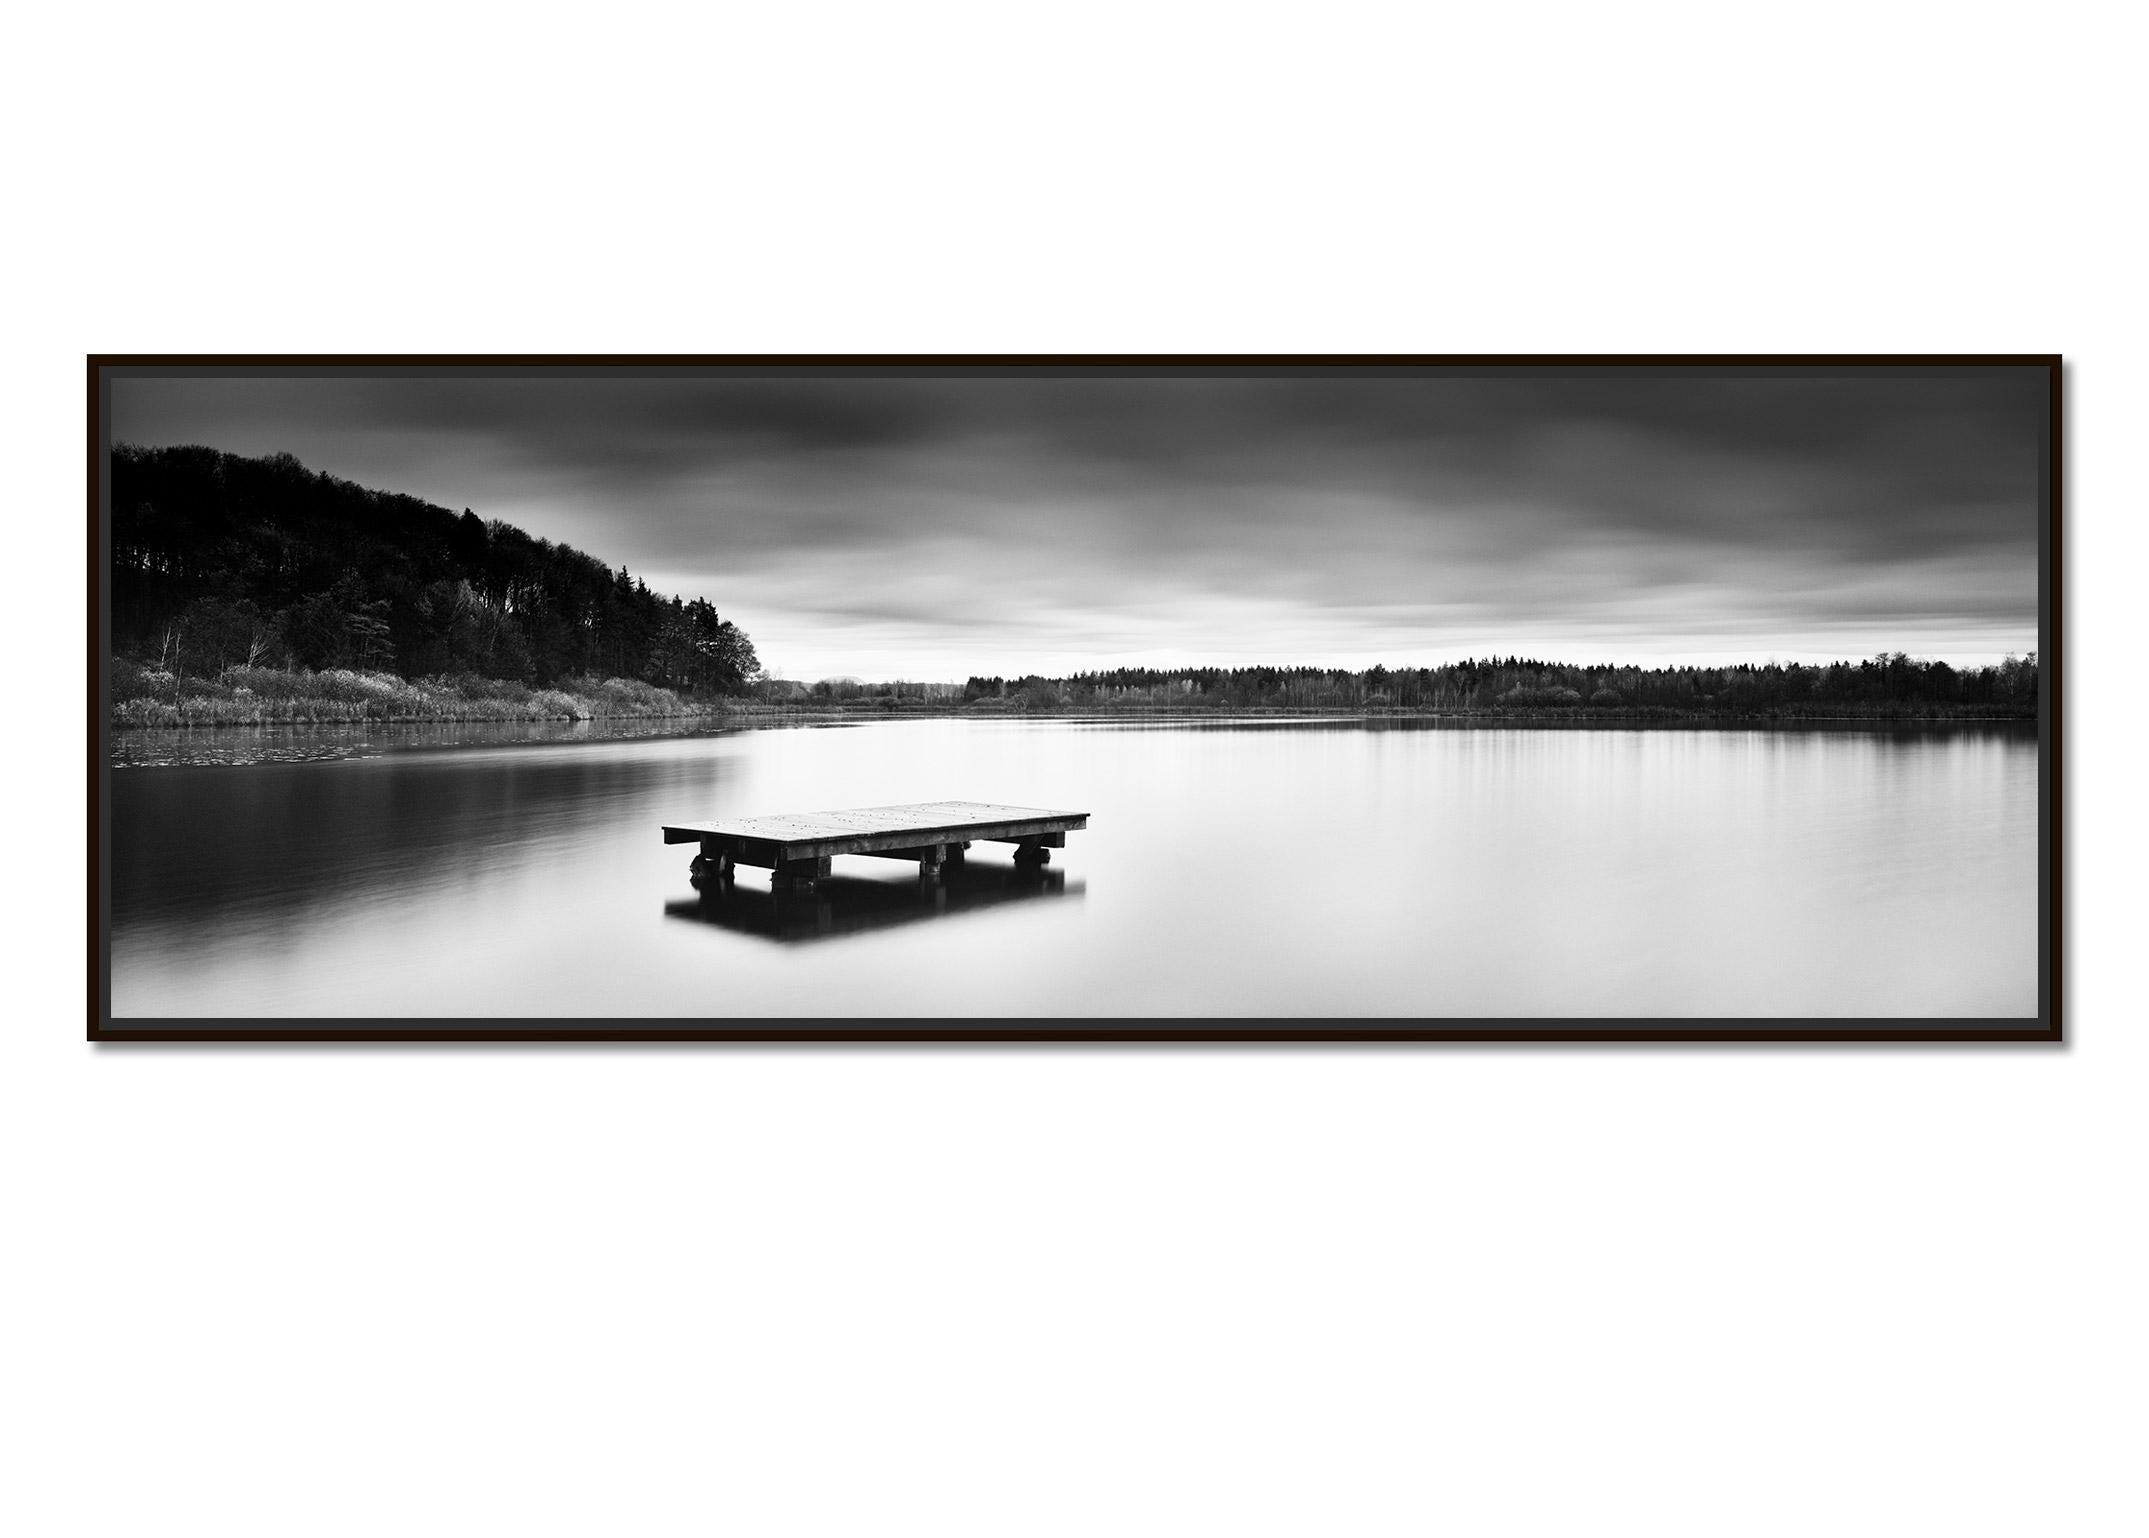 Lake View, Panorama, long exposure black and white fineart landscape photography - Photograph by Gerald Berghammer